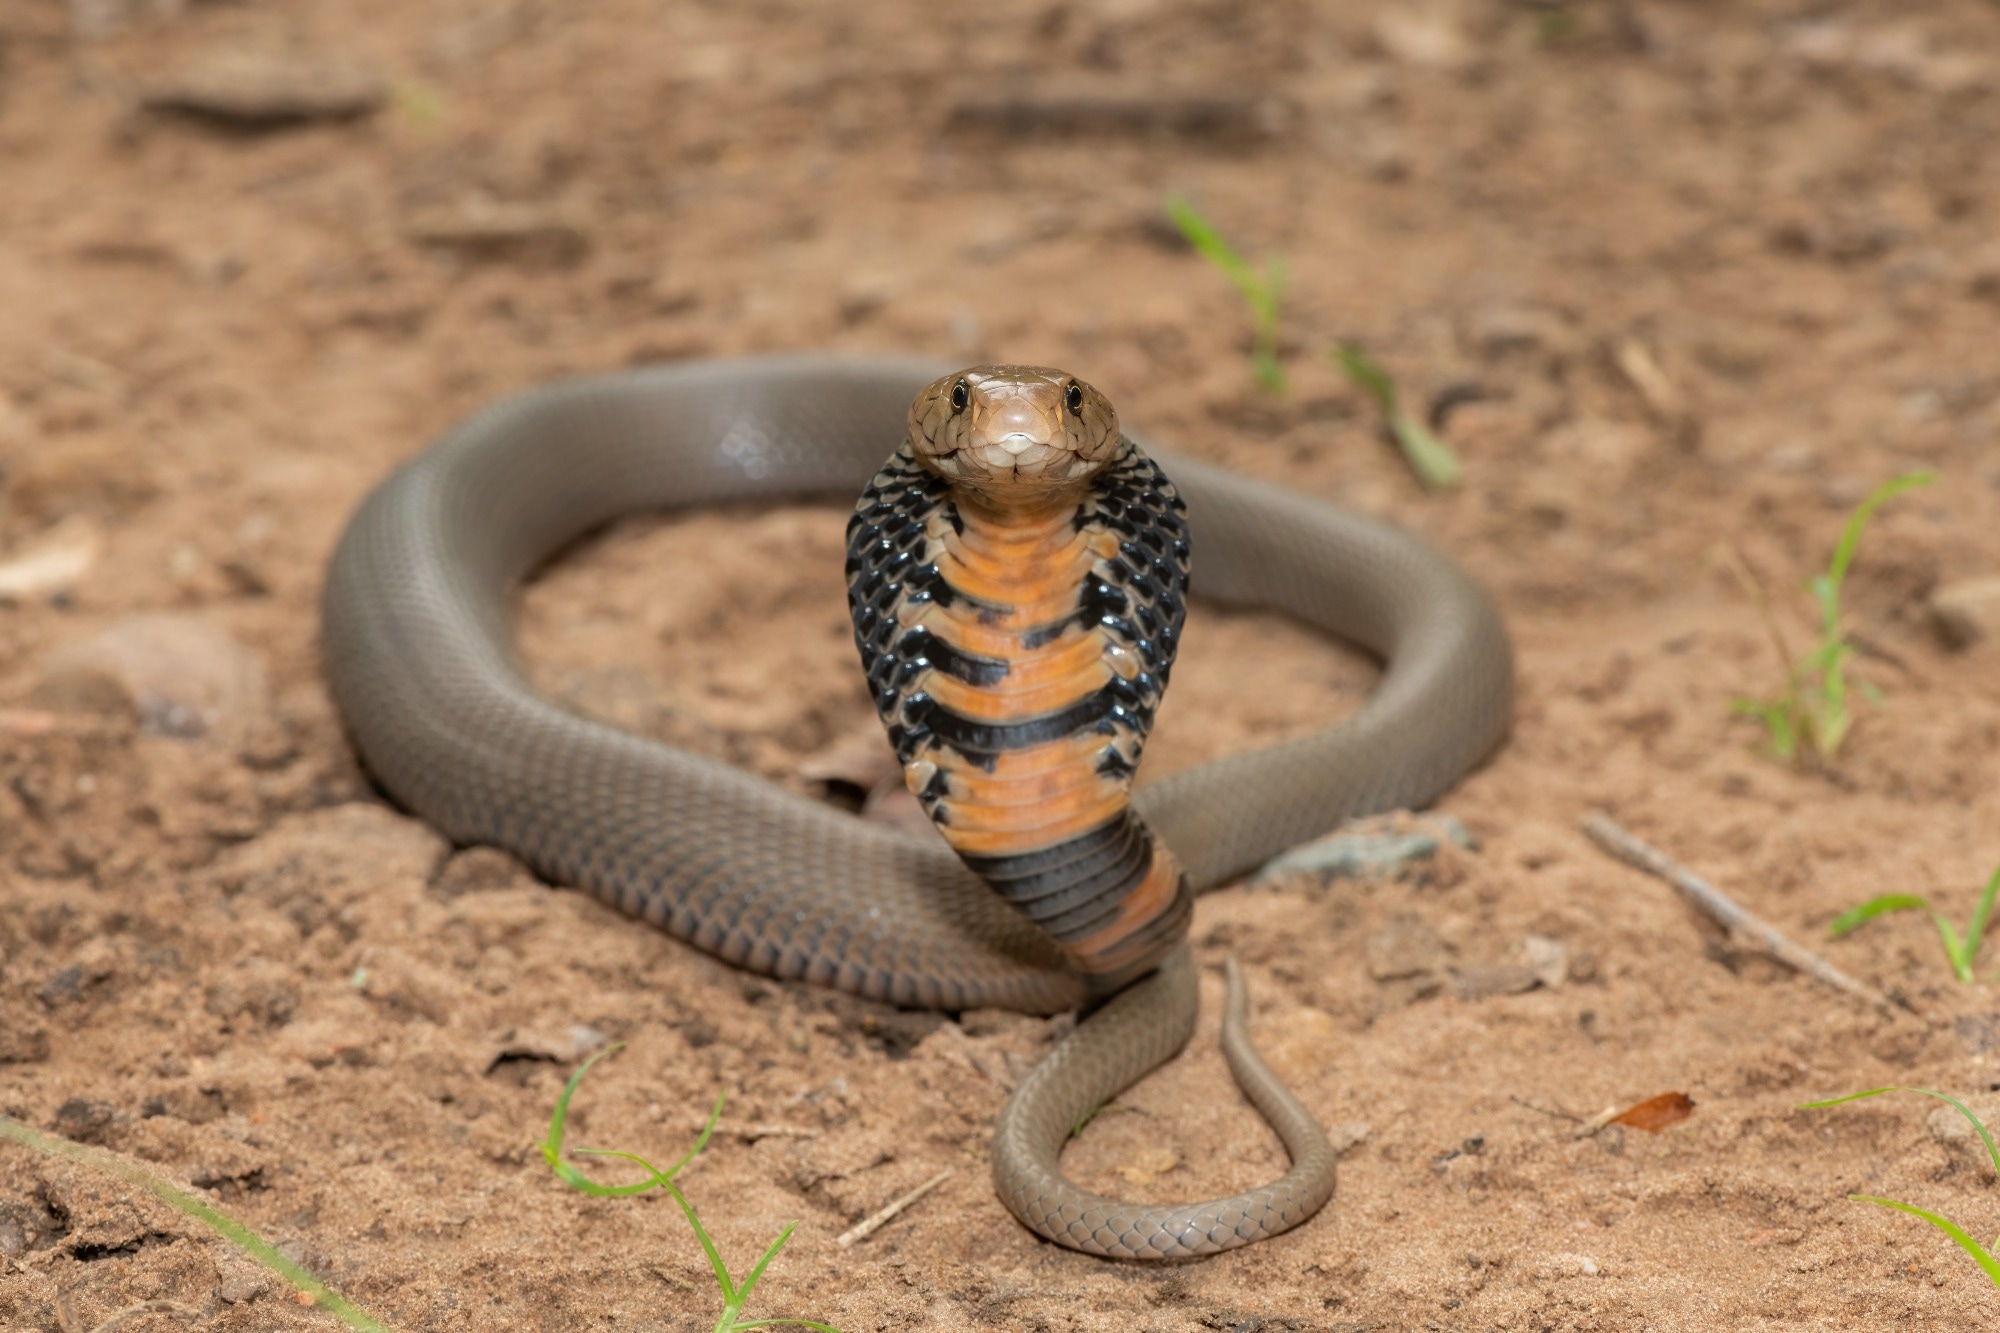 Study: Dermonecrosis caused by a spitting cobra snakebite results from toxin potentiation and is prevented by the repurposed drug varespladib. Image Credit: Craig Cordier / Shutterstock